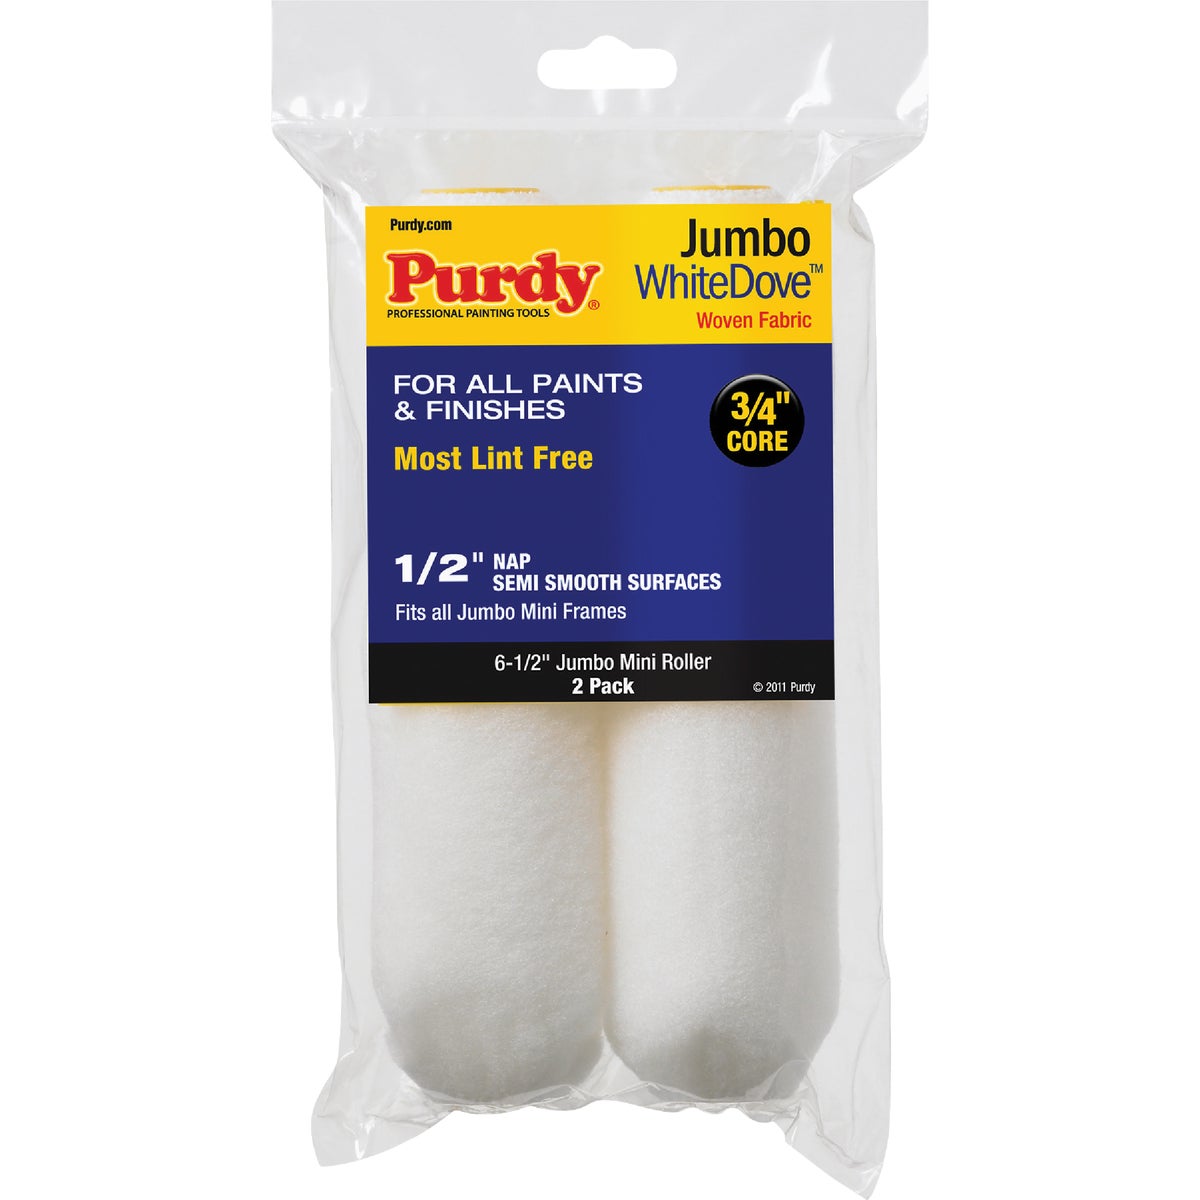 Purdy White Dove 6-1/2 In. x 1/2 In. Jumbo Mini Woven Fabric Roller Cover (2-Pack)